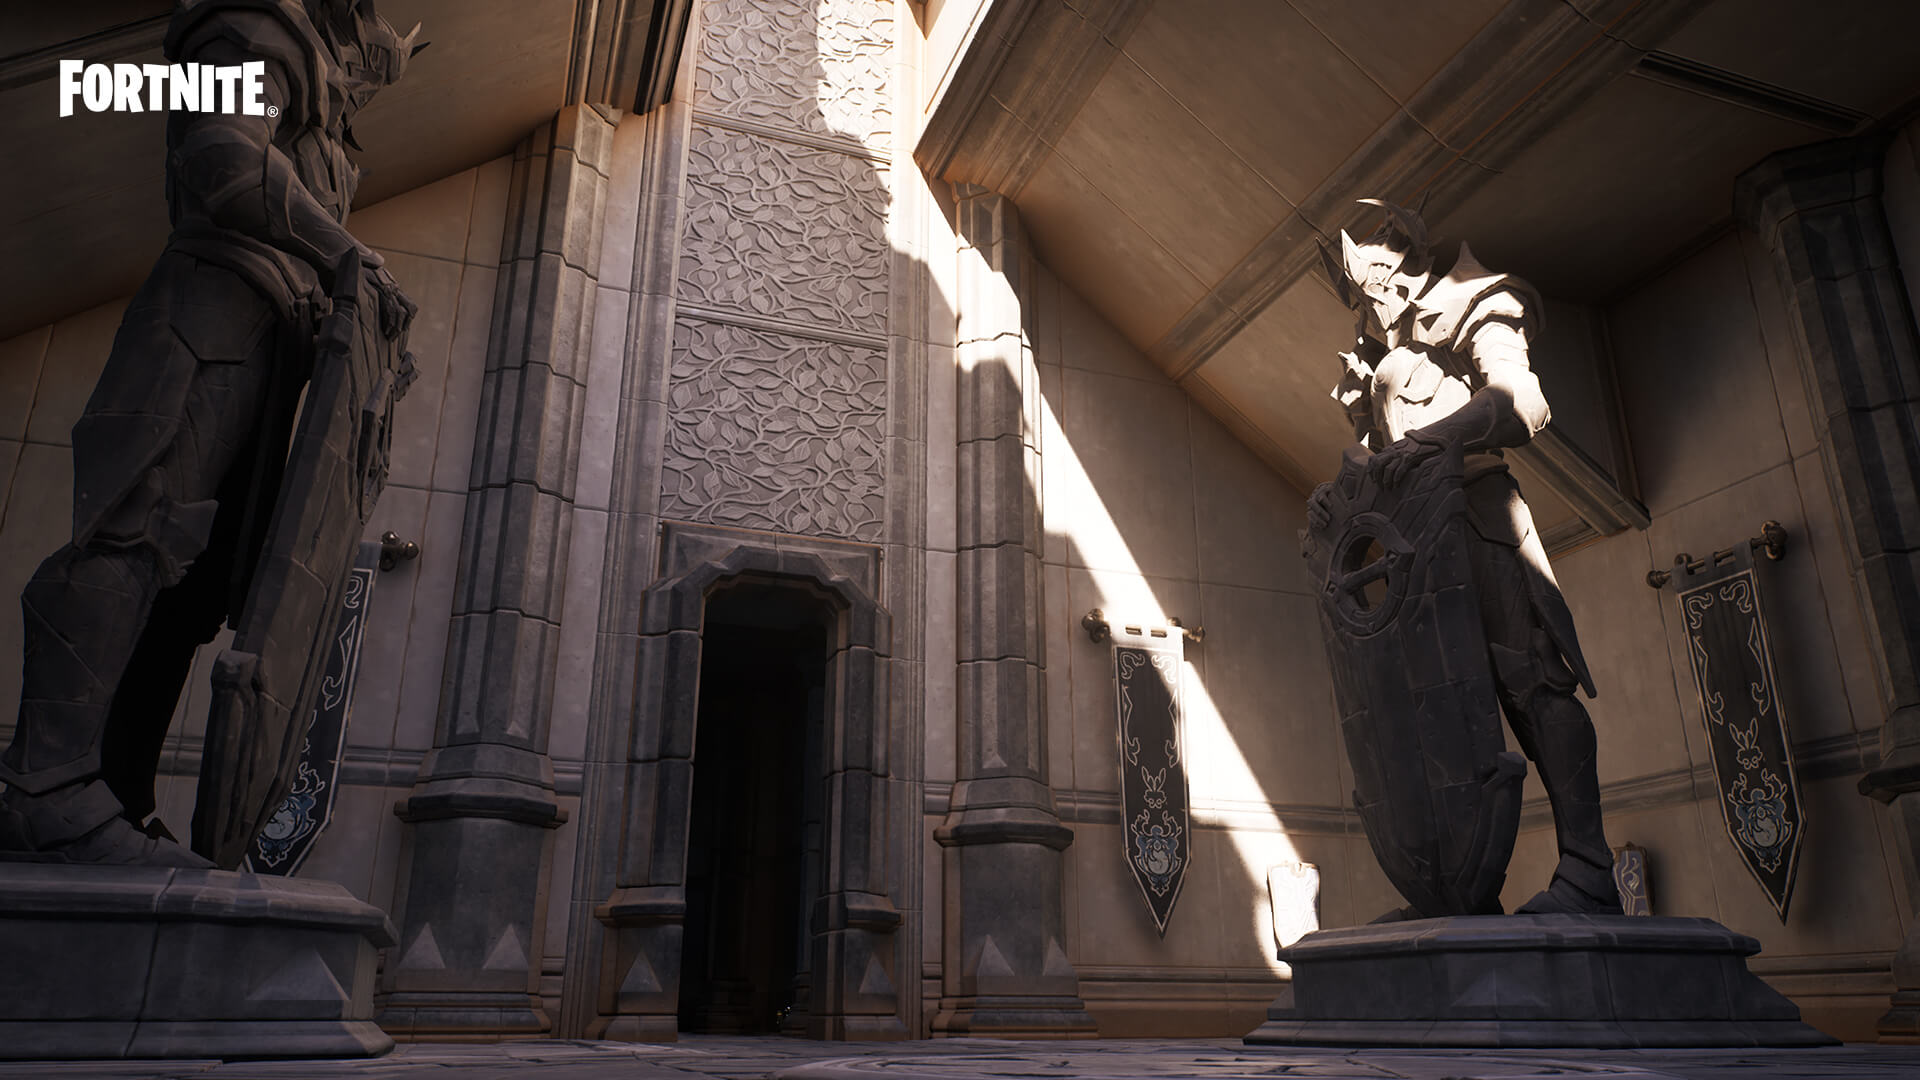 Unreal Engine - Is Casting Really That Bad? 